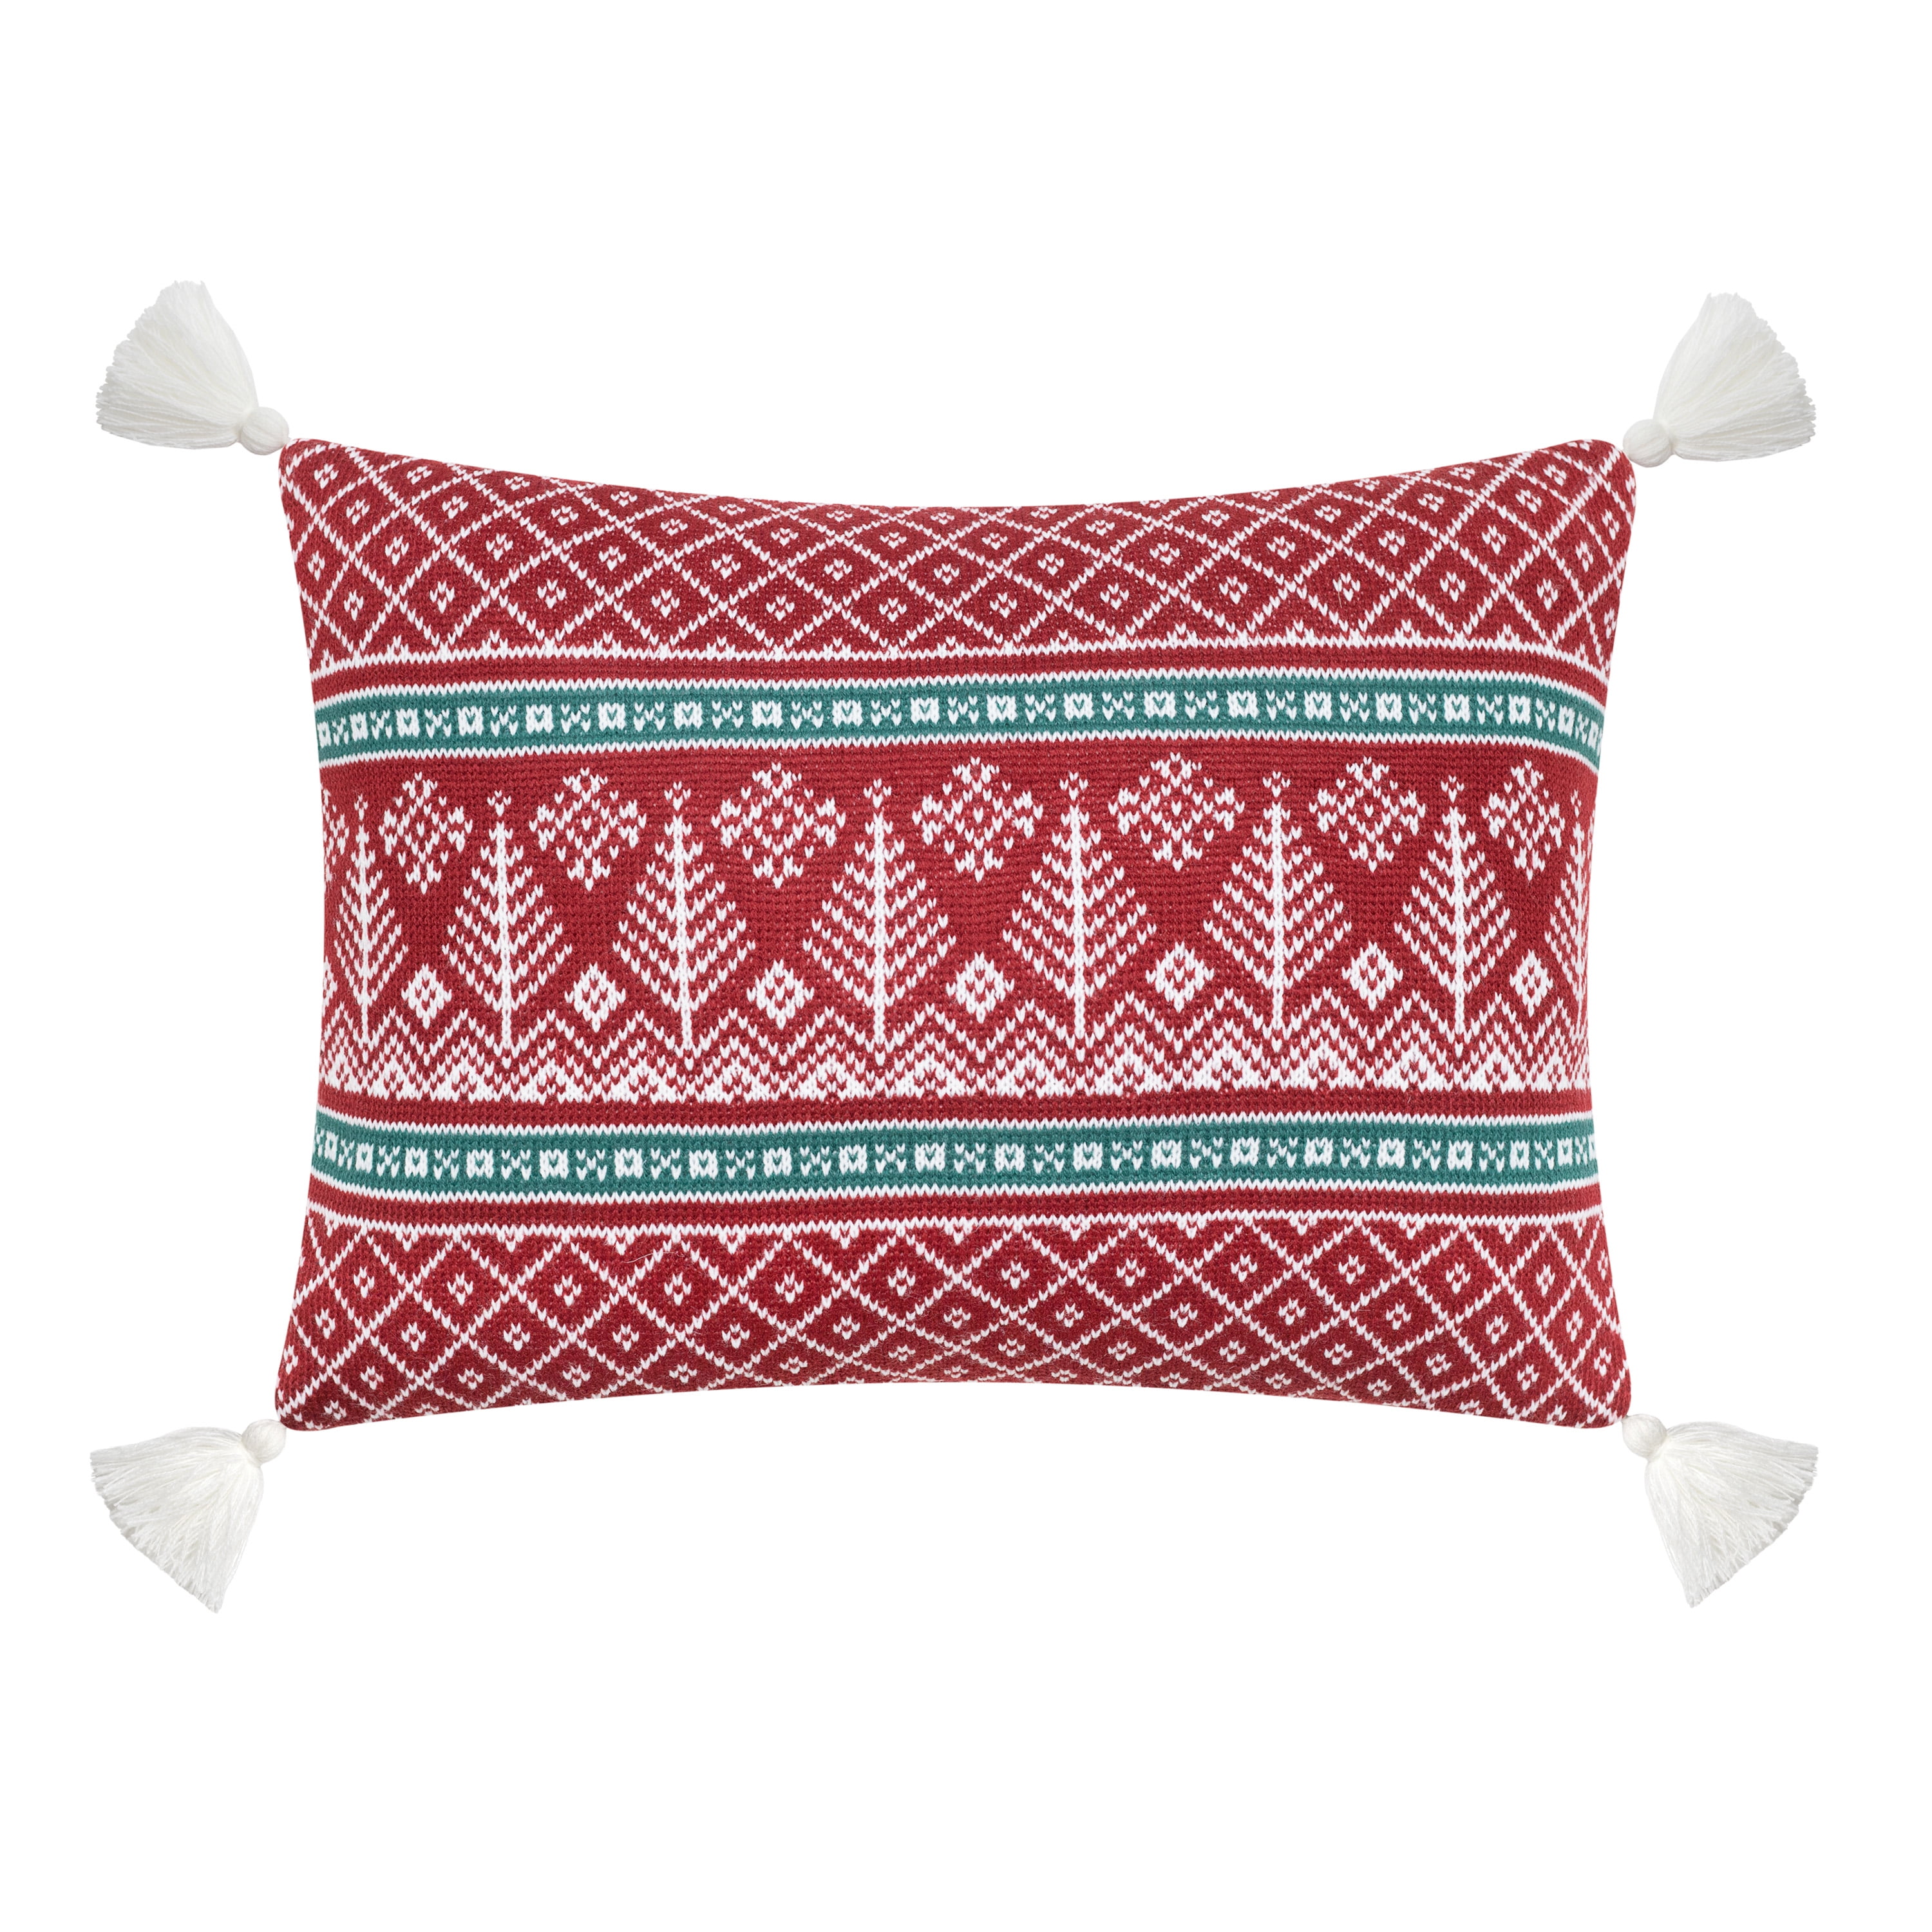 Natural Linen Tribal Print Pillow Cover with Contrasting Red Back 20 x 20